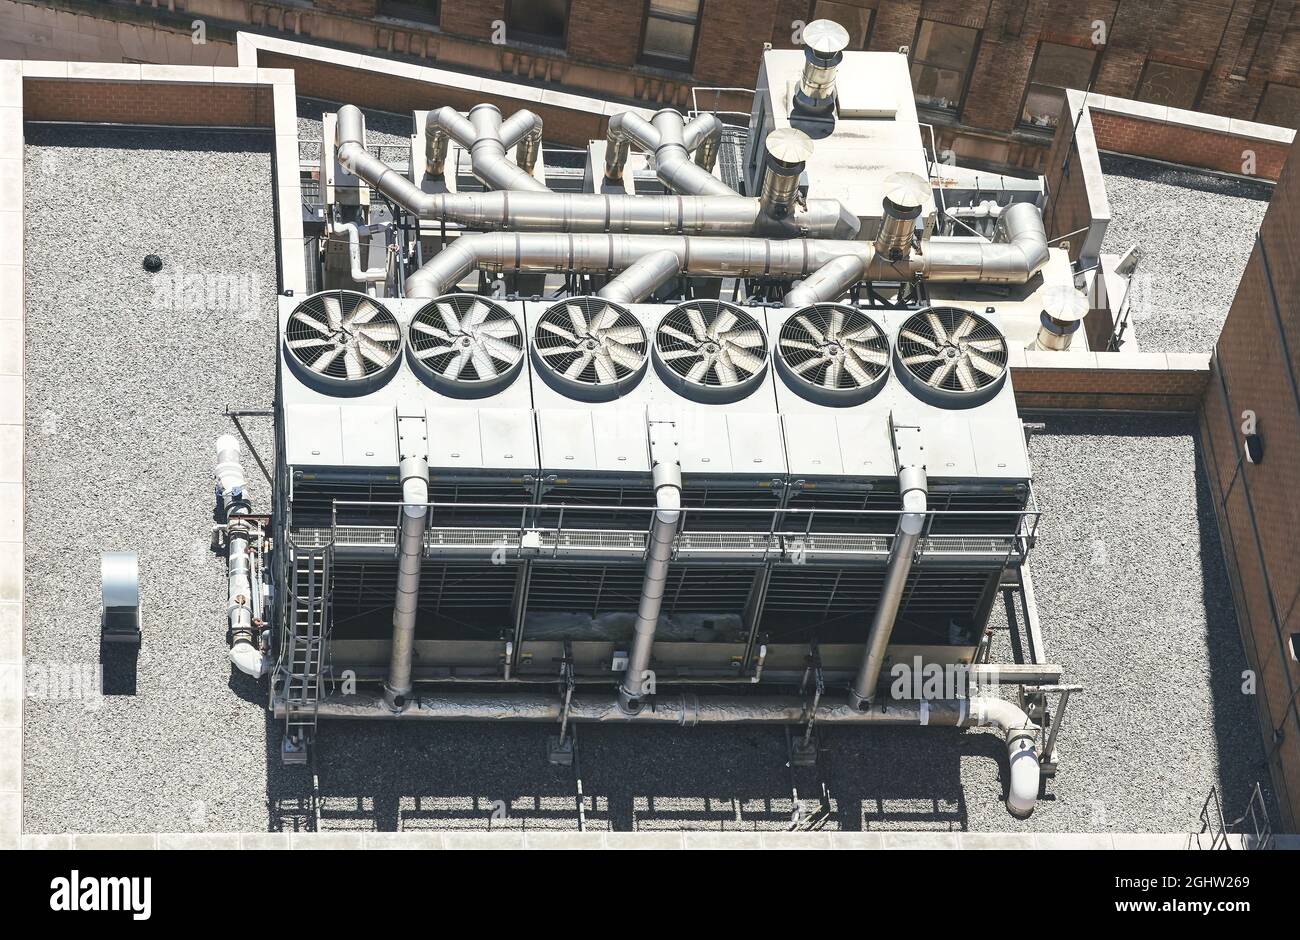 Aerial view of rooftop air conditioning system, New York City, USA. Stock Photo